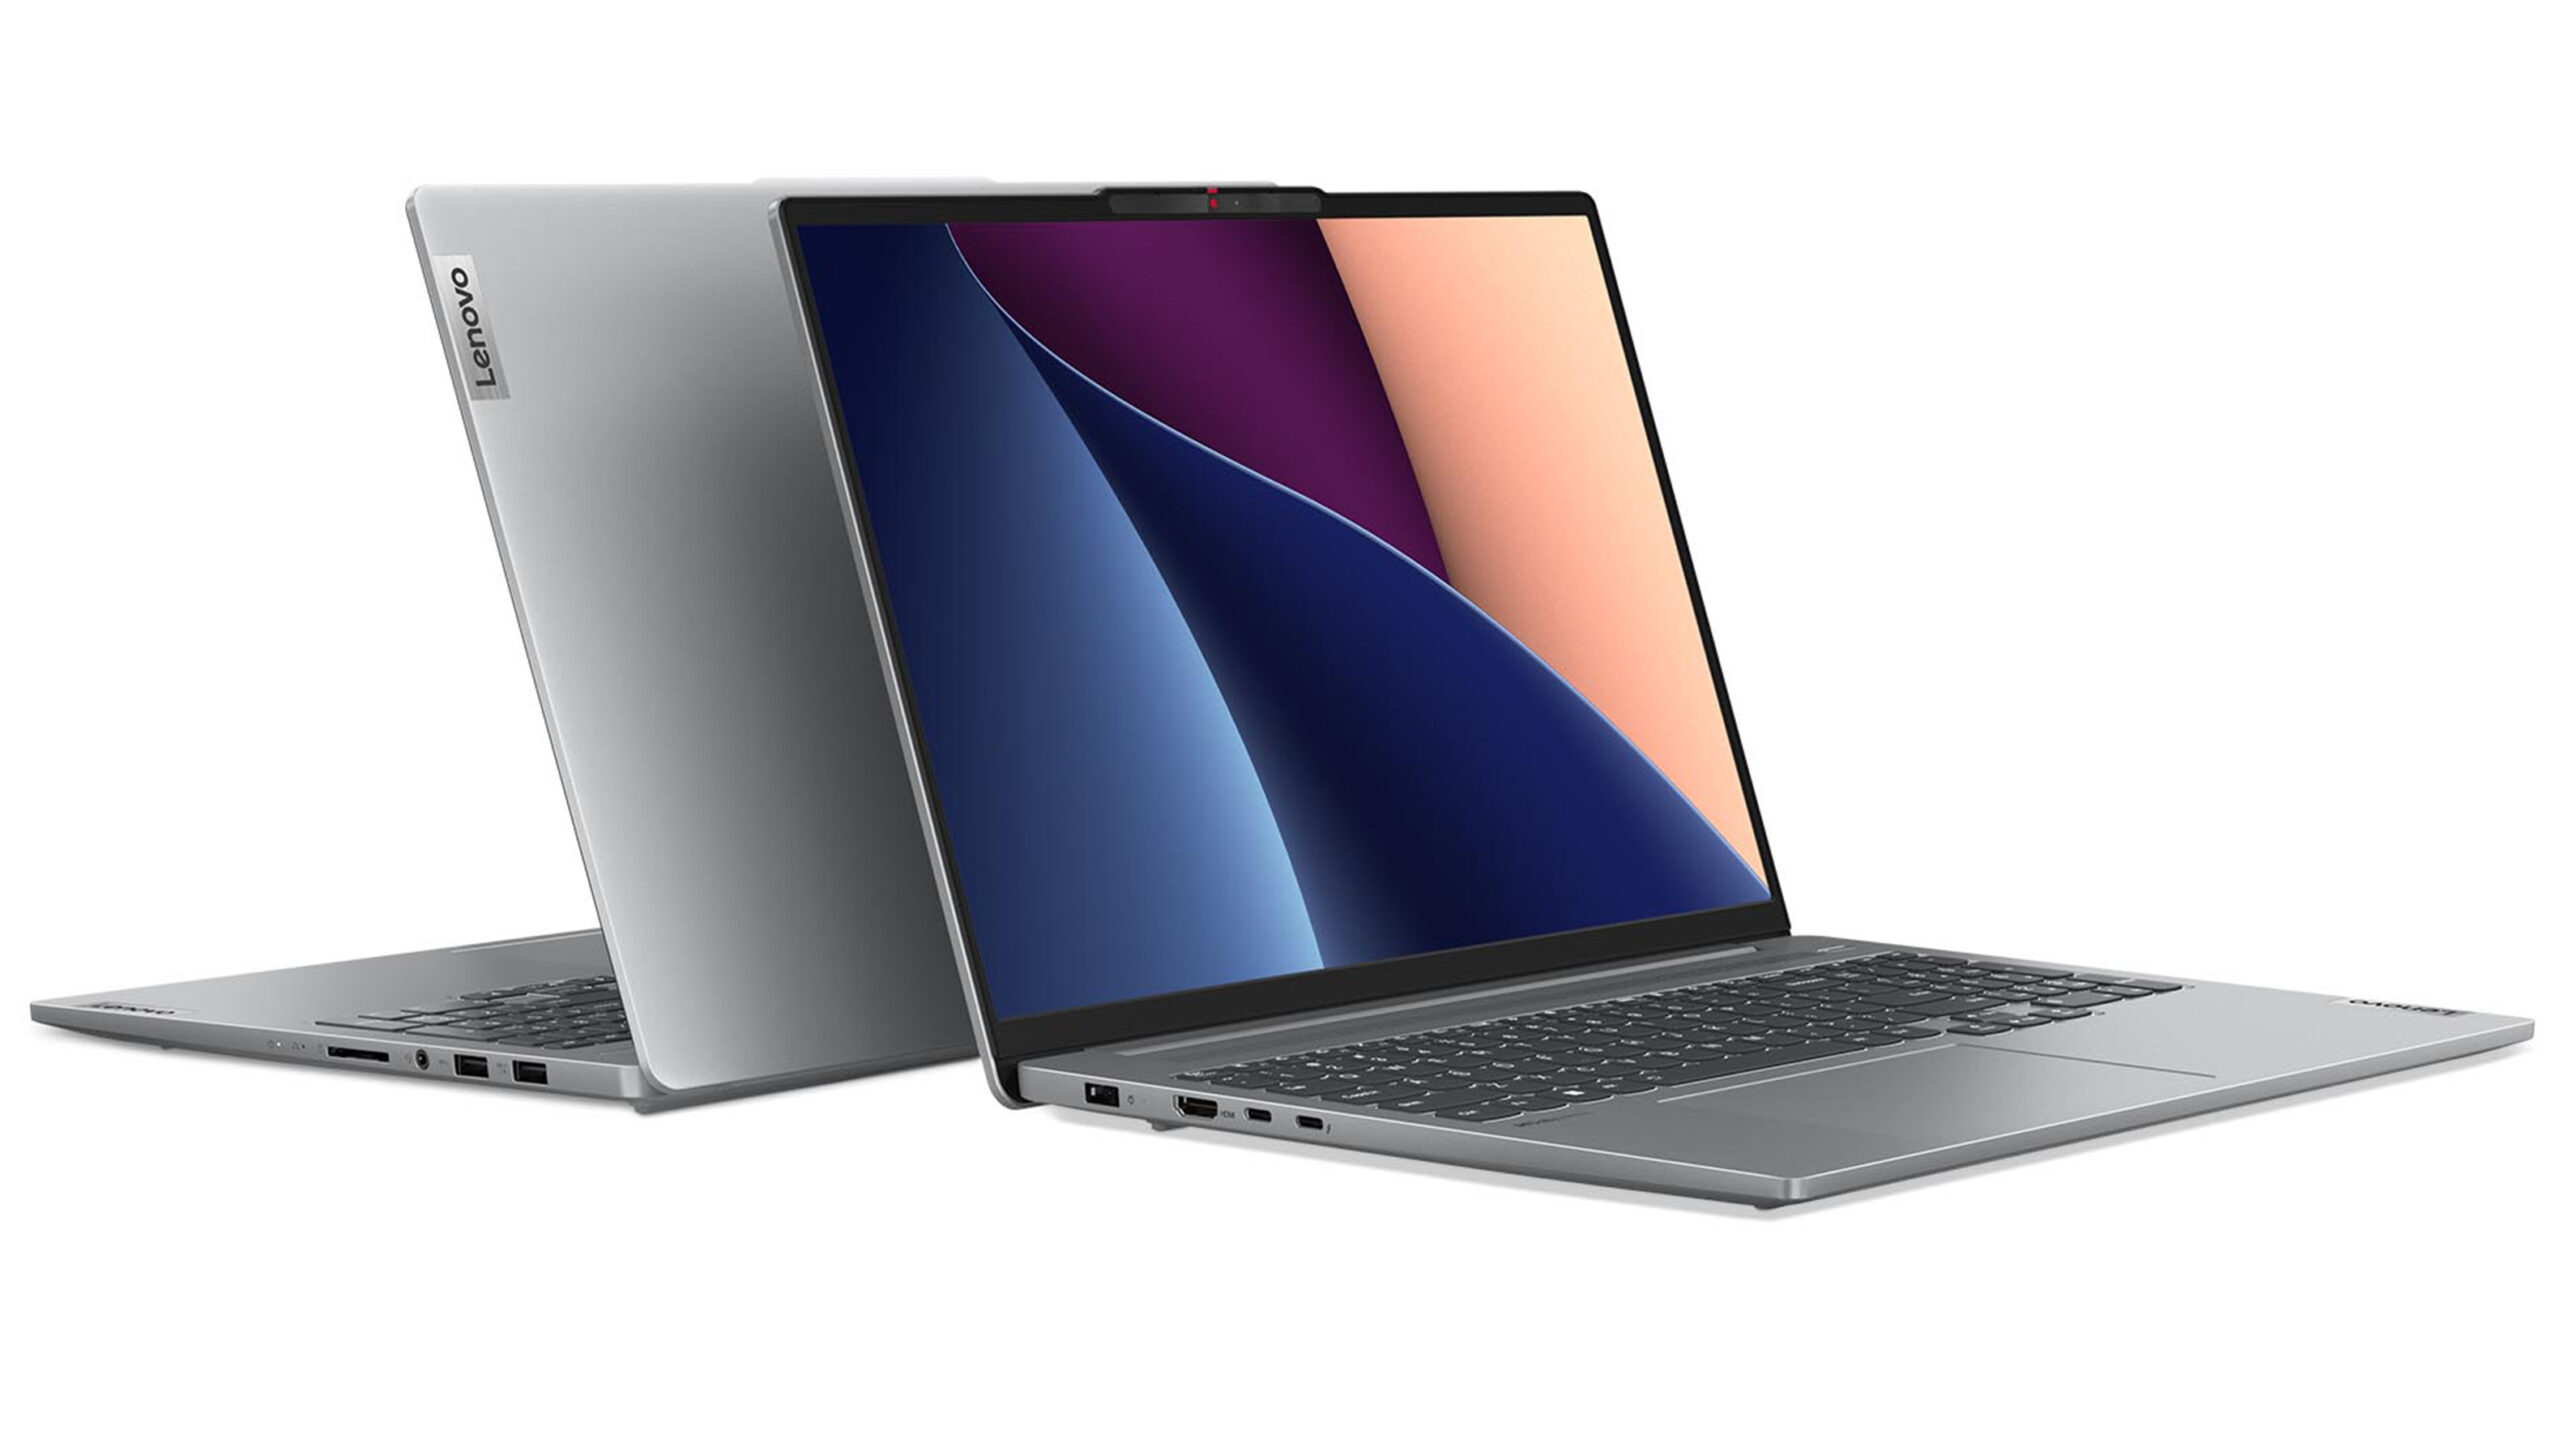 Lenovo unveils several laptops ahead of CES 2023